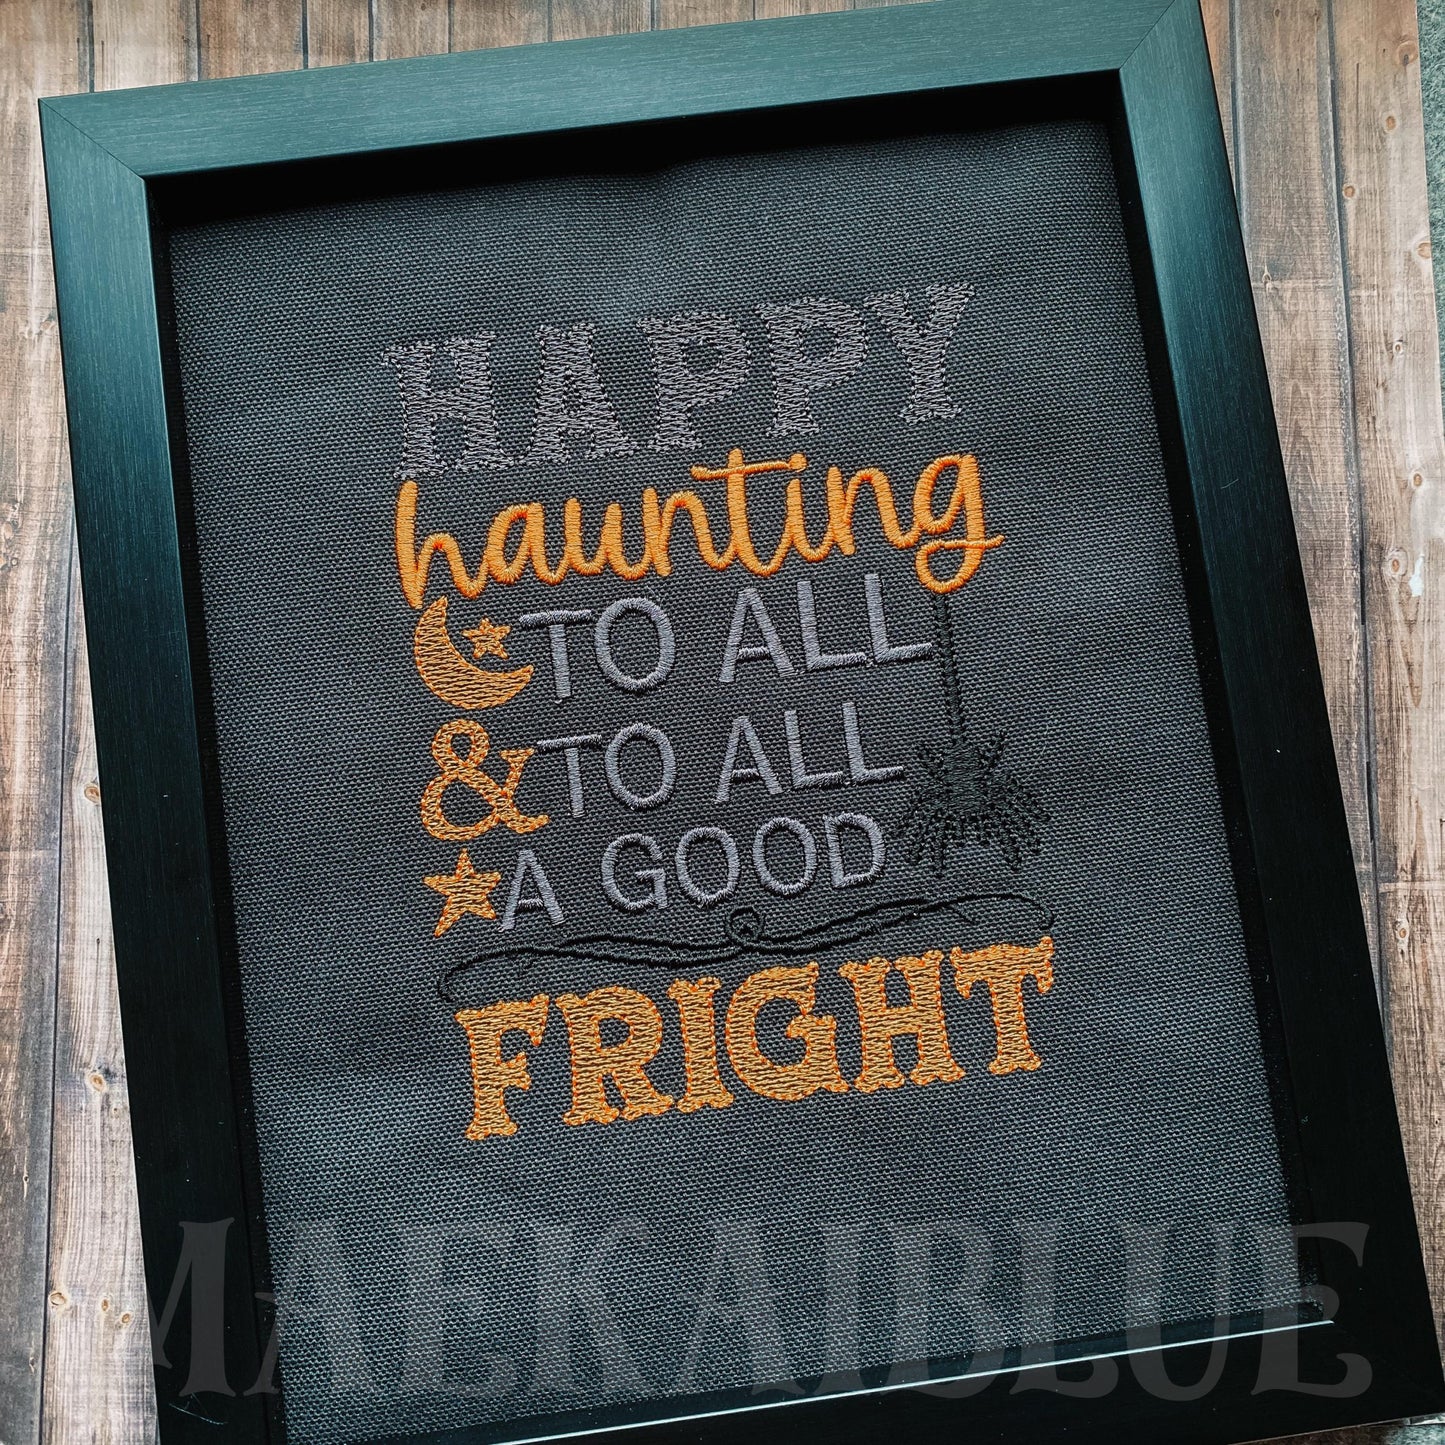 Happy Haunting - 3 sizes- Digital Embroidery Design